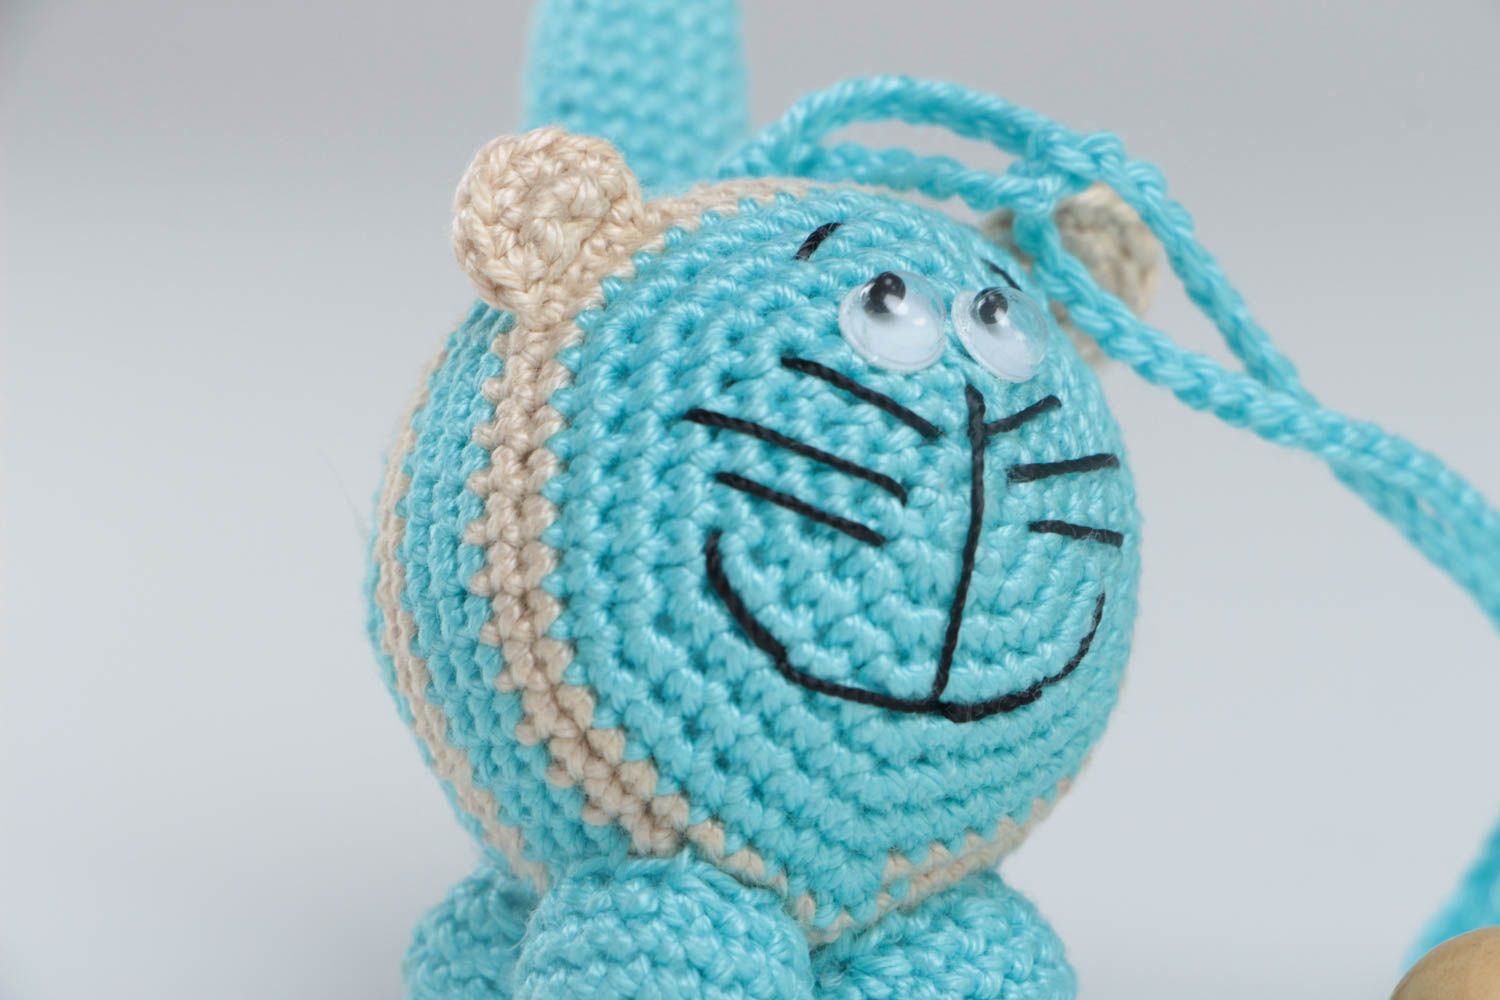 Crocheted cotton rattle small blue cat handmade toy for little children photo 3